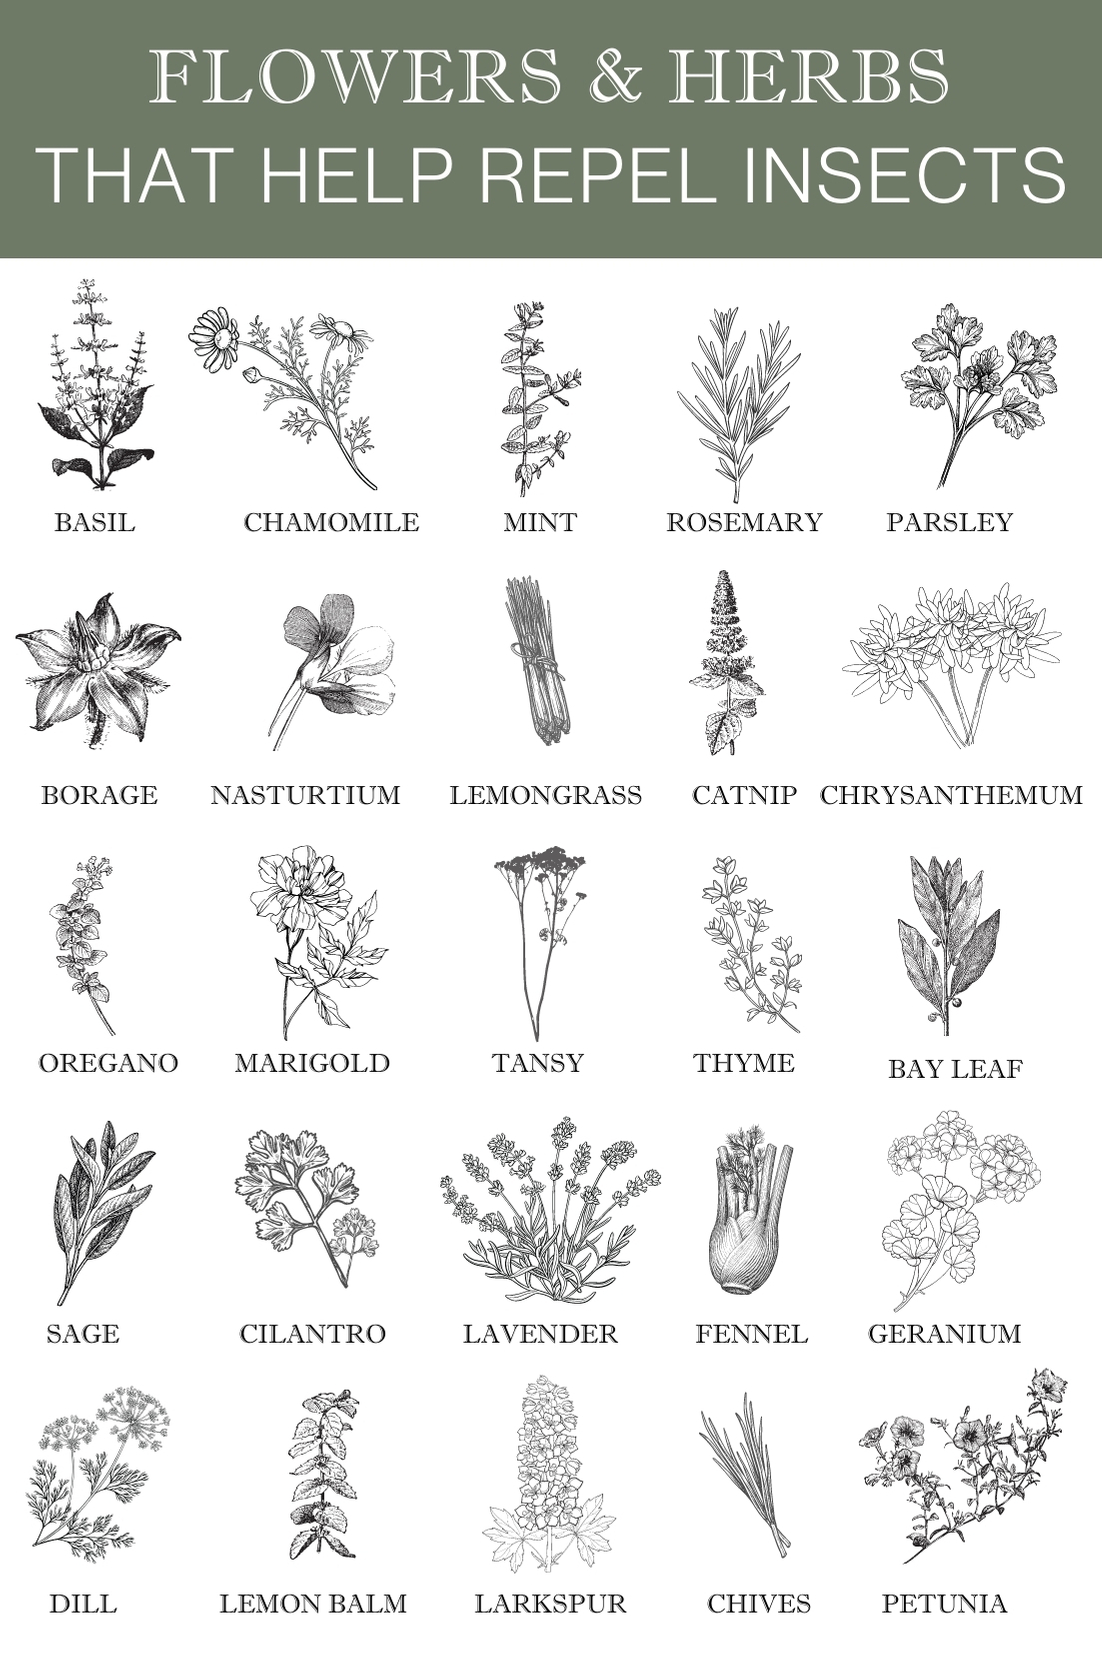 Companion Planting - Flowers and Herbs that help repel insects